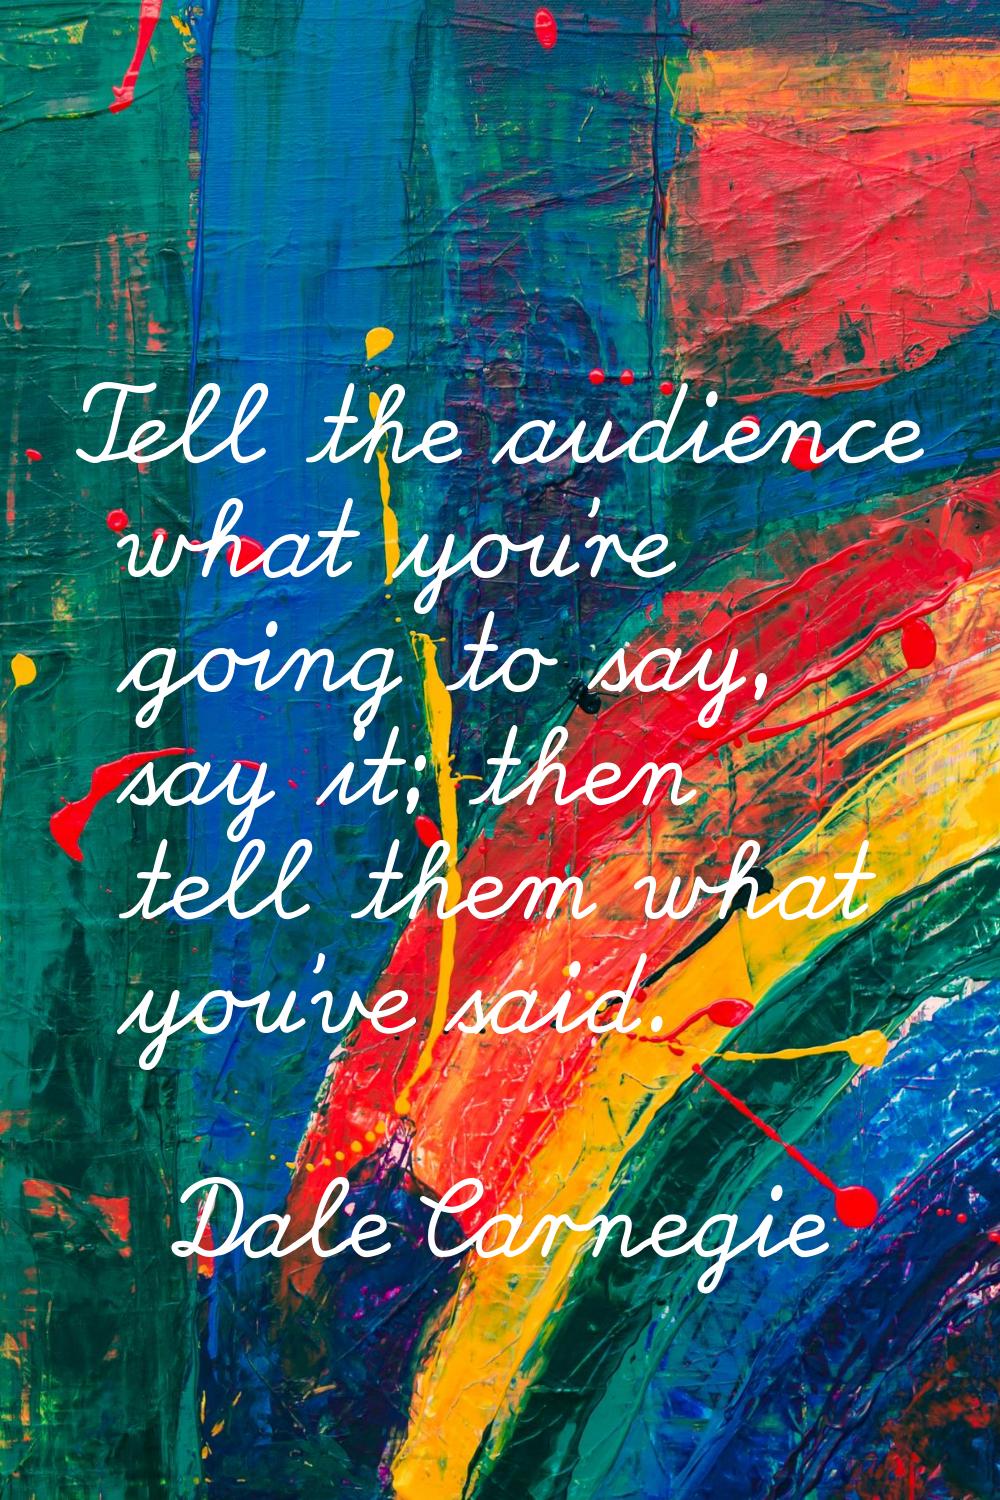 Tell the audience what you're going to say, say it; then tell them what you've said.